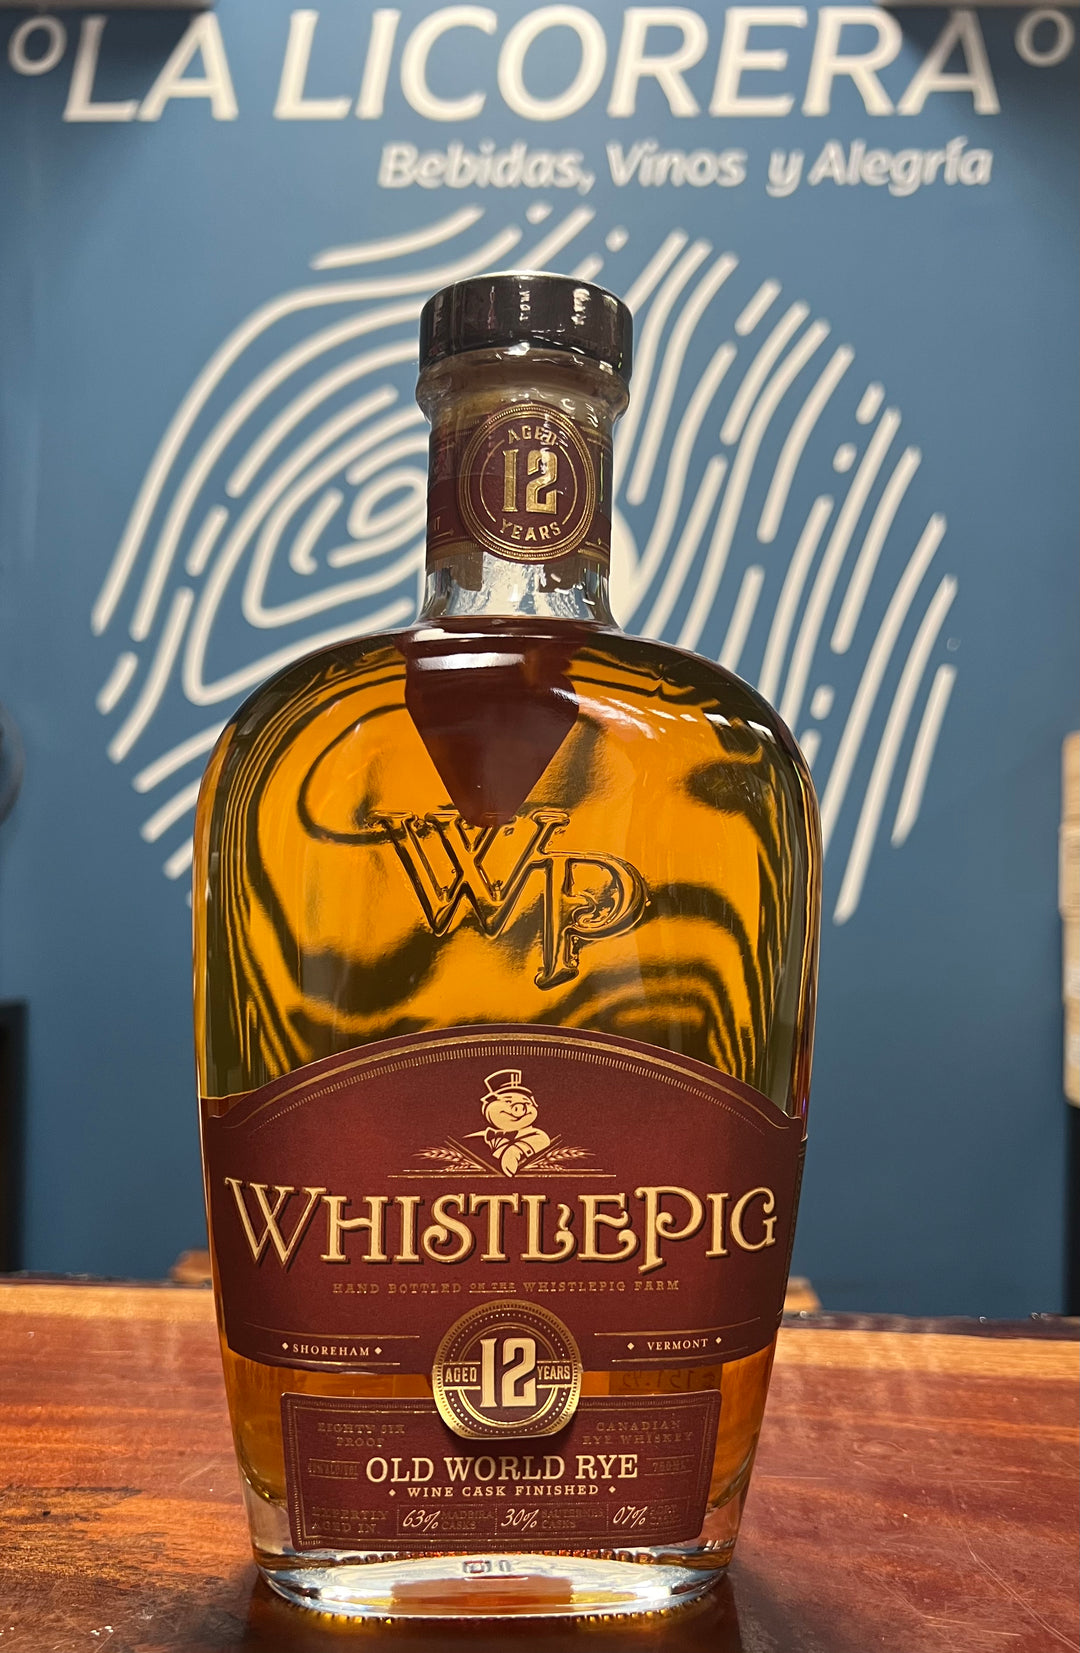 Whistlepig 12 Year old world whiskey- 750ml.